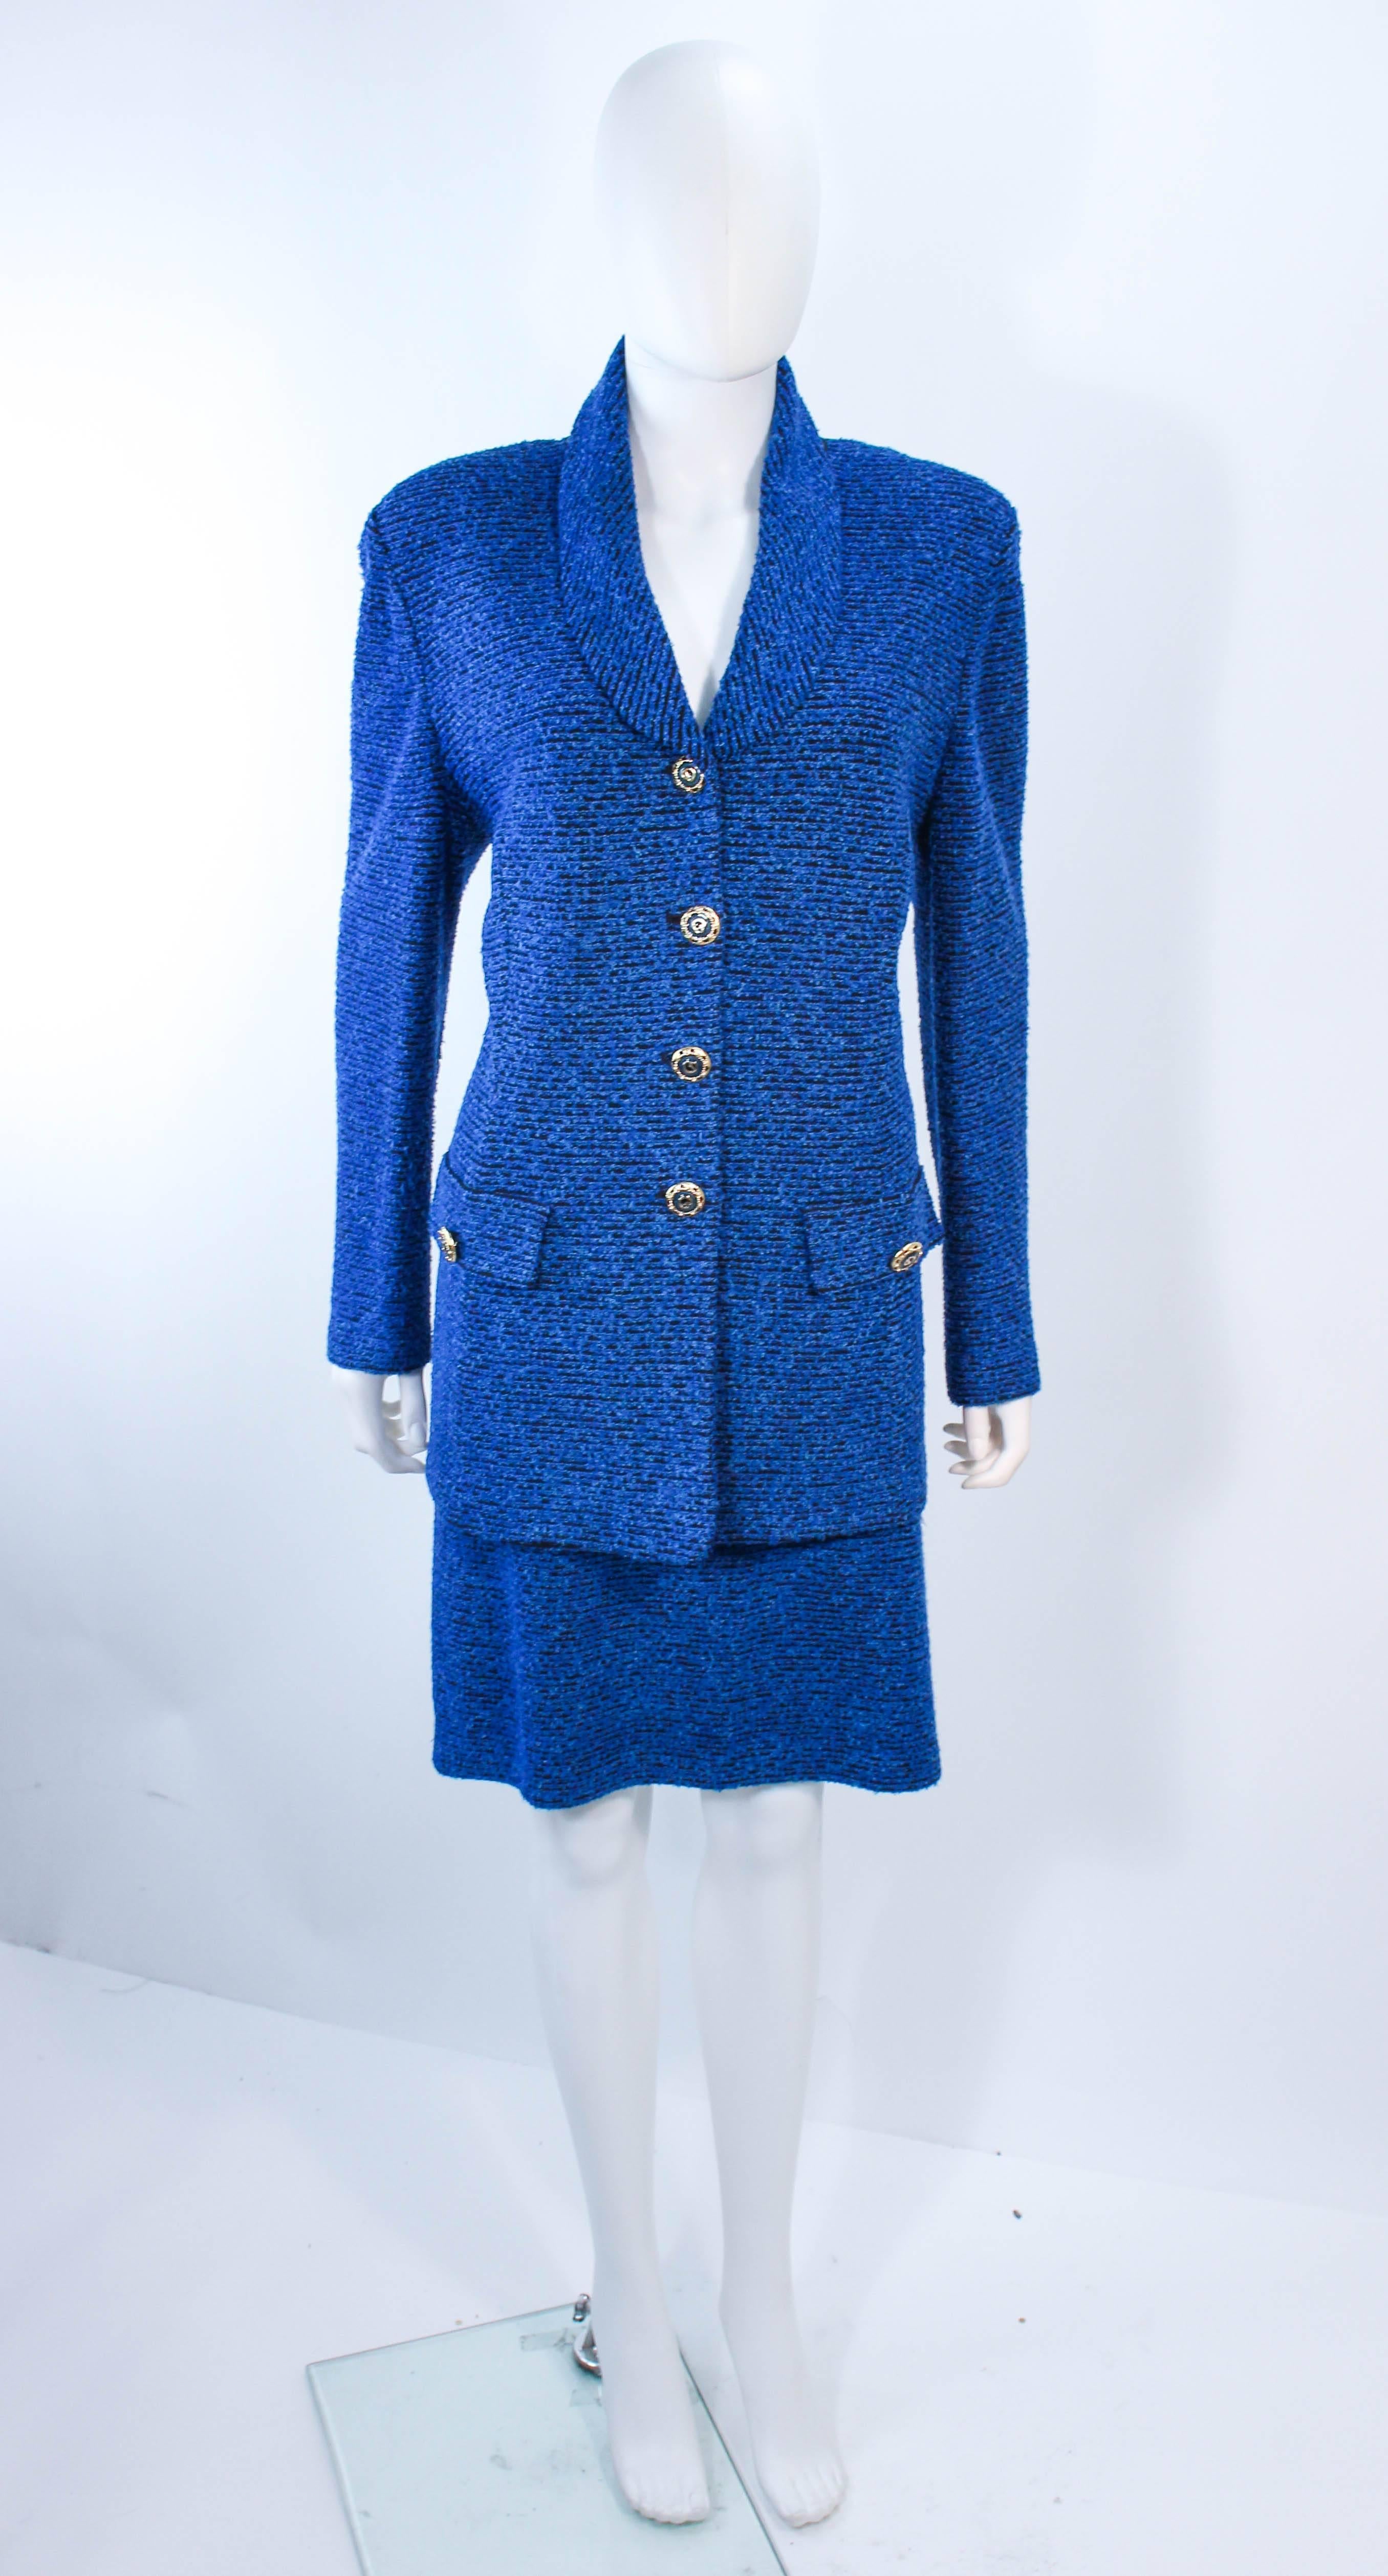 This vintage St. John suit is composed of a royal blue stretch knit wool. The jacket has a classic style with center front buttons and pockets. The skirt has a pencil style with elastic waist. In excellent vintage condition.

**Please